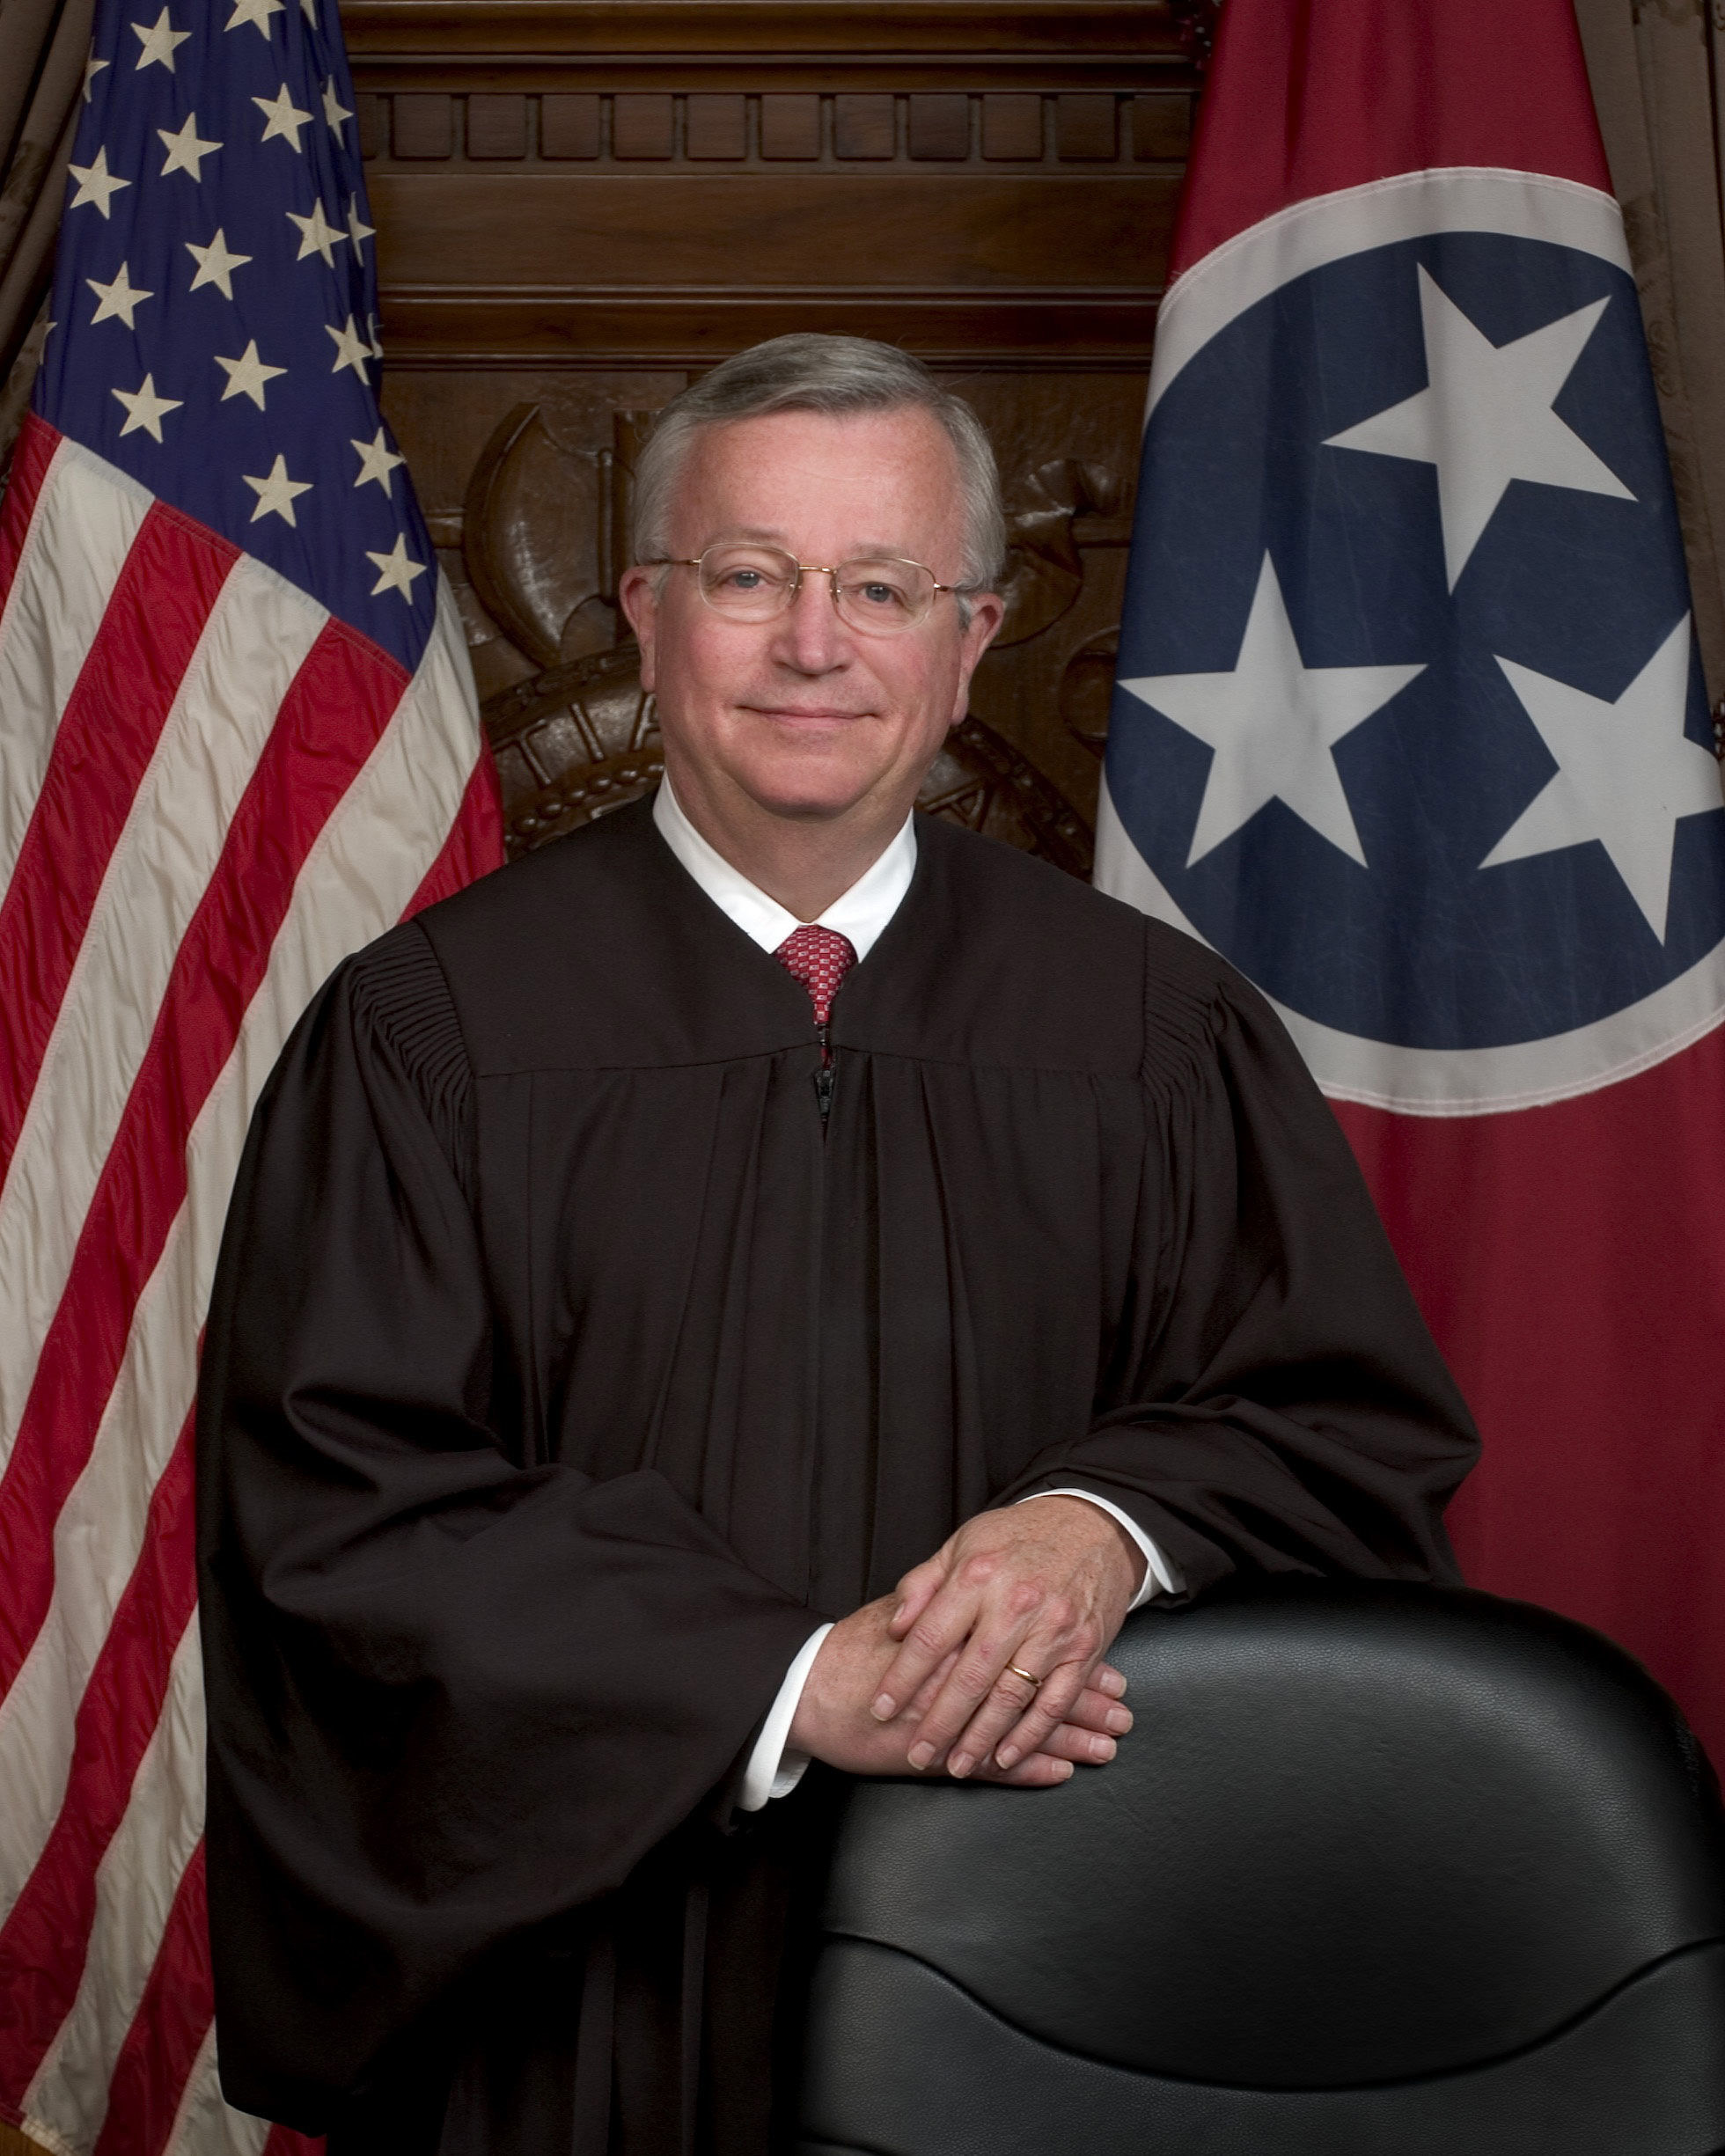 Former Chief Justice Barker